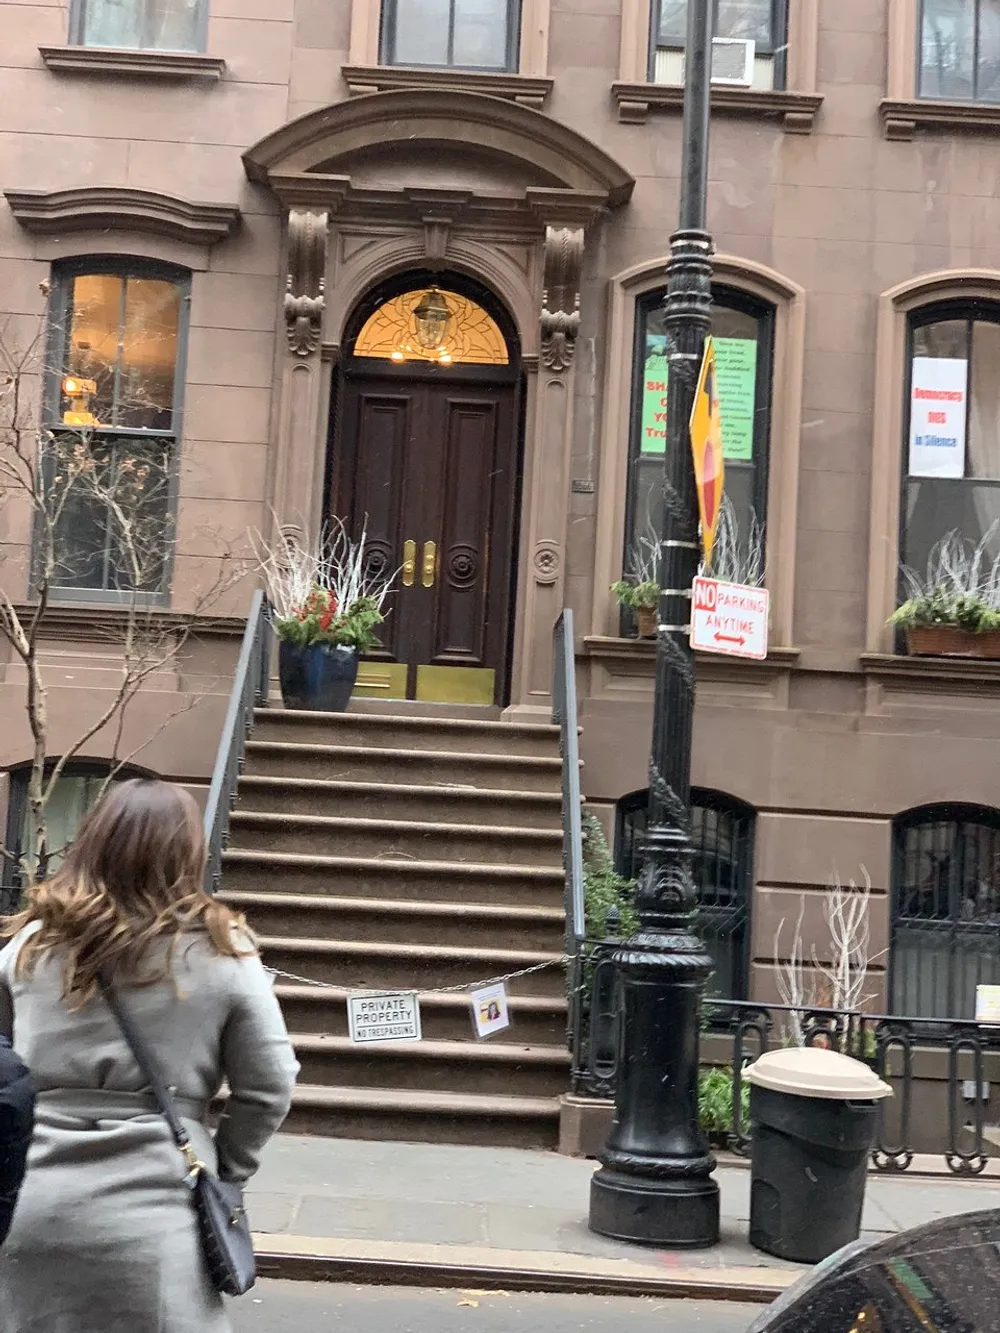 The image shows a woman walking past a brownstone building with a set of stairs leading to an ornamental arched doorway with signs around indicating No Parking Anytime and Private Property No Trespassing